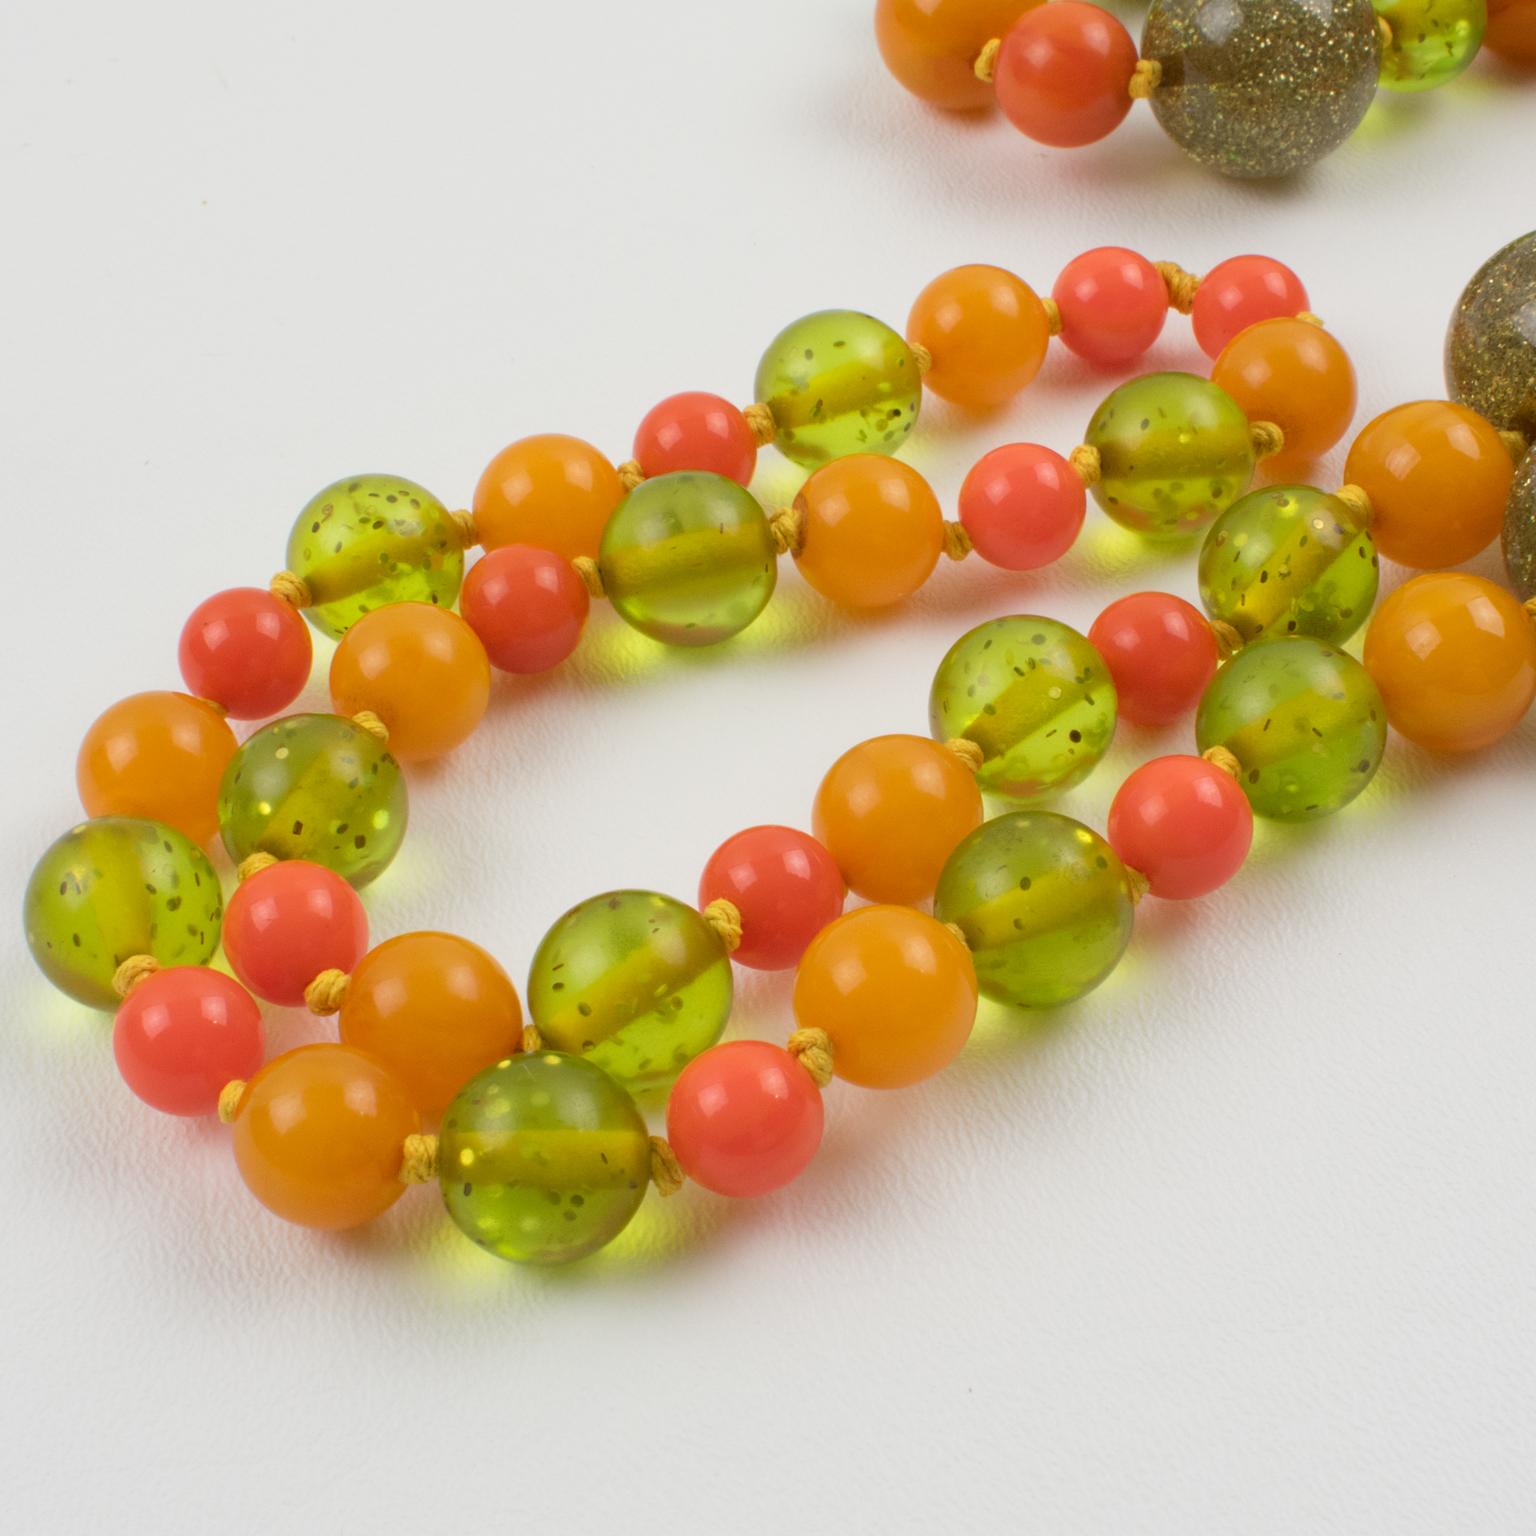 Bakelite and Lucite Extra Long Necklace with Orange, Green and Glitter Beads For Sale 7